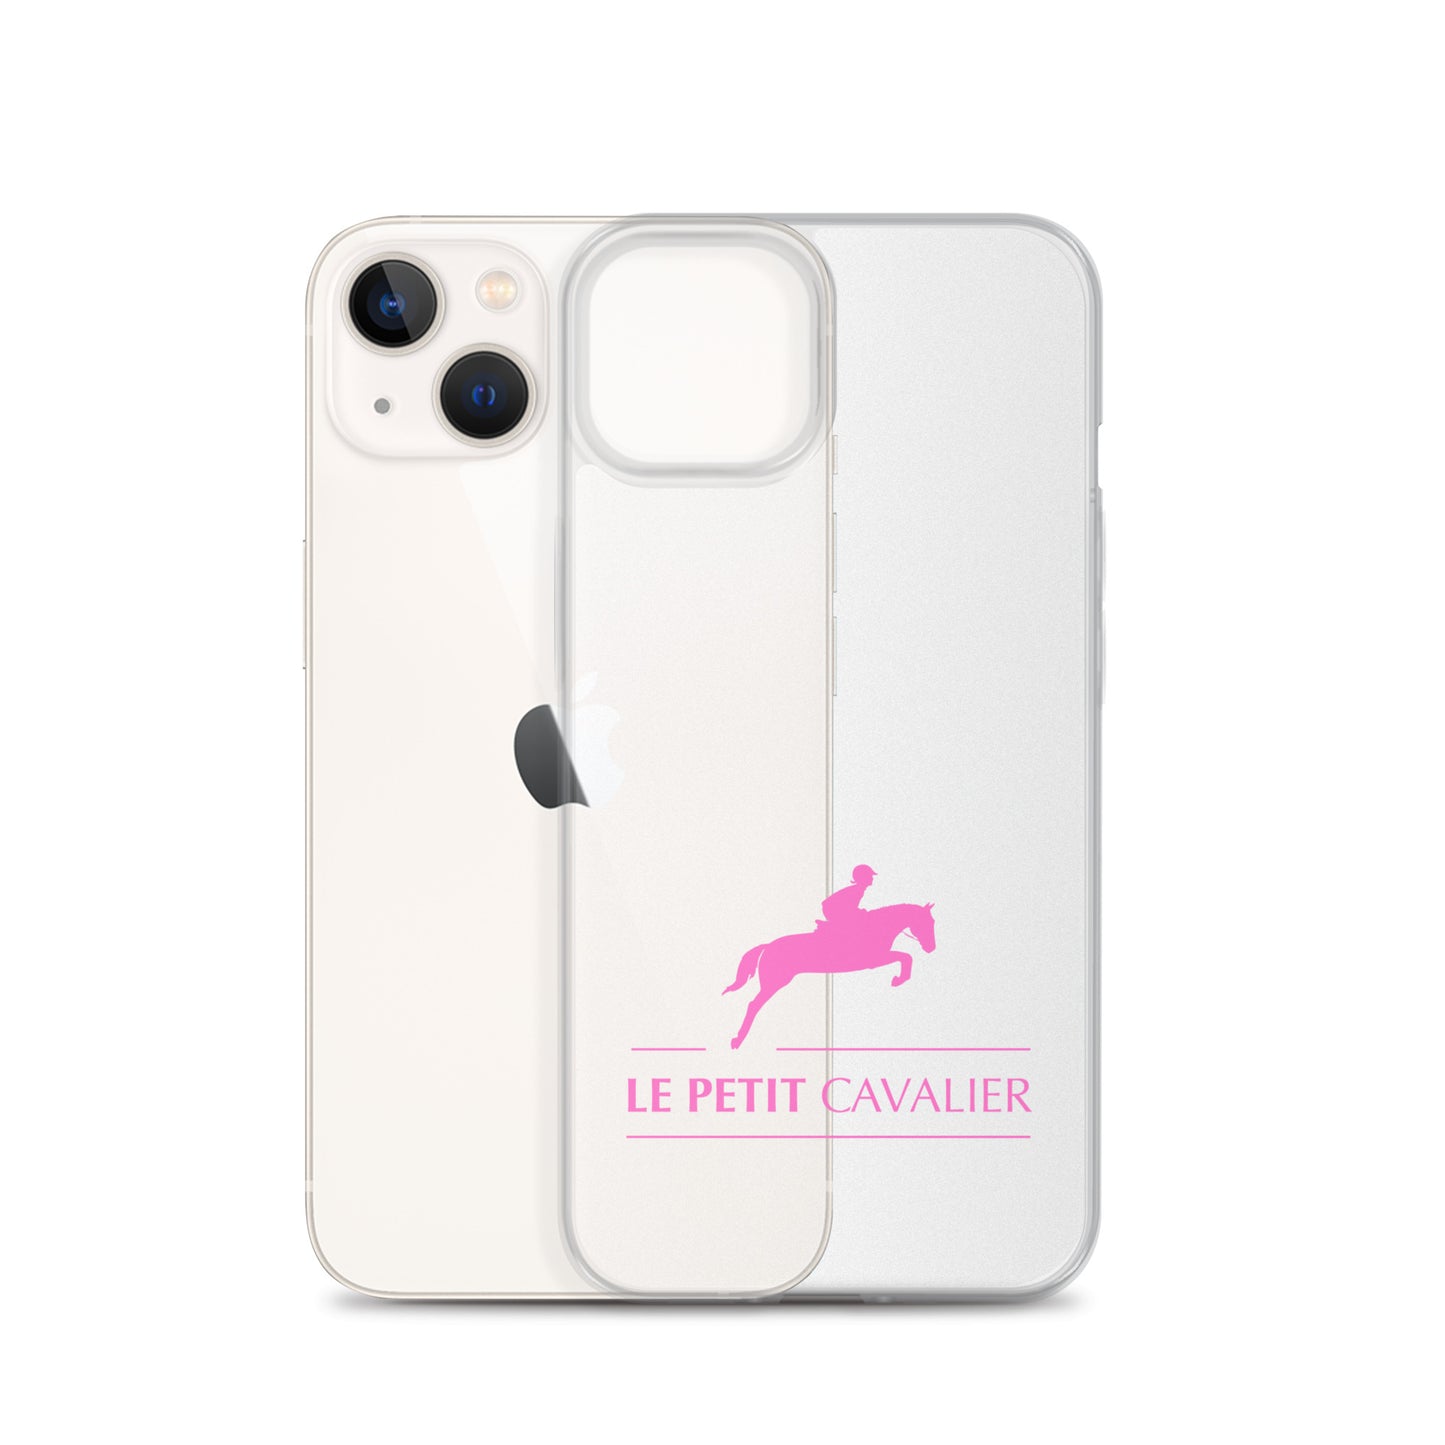 Coque/Protection iPhone - Logo cheval rose